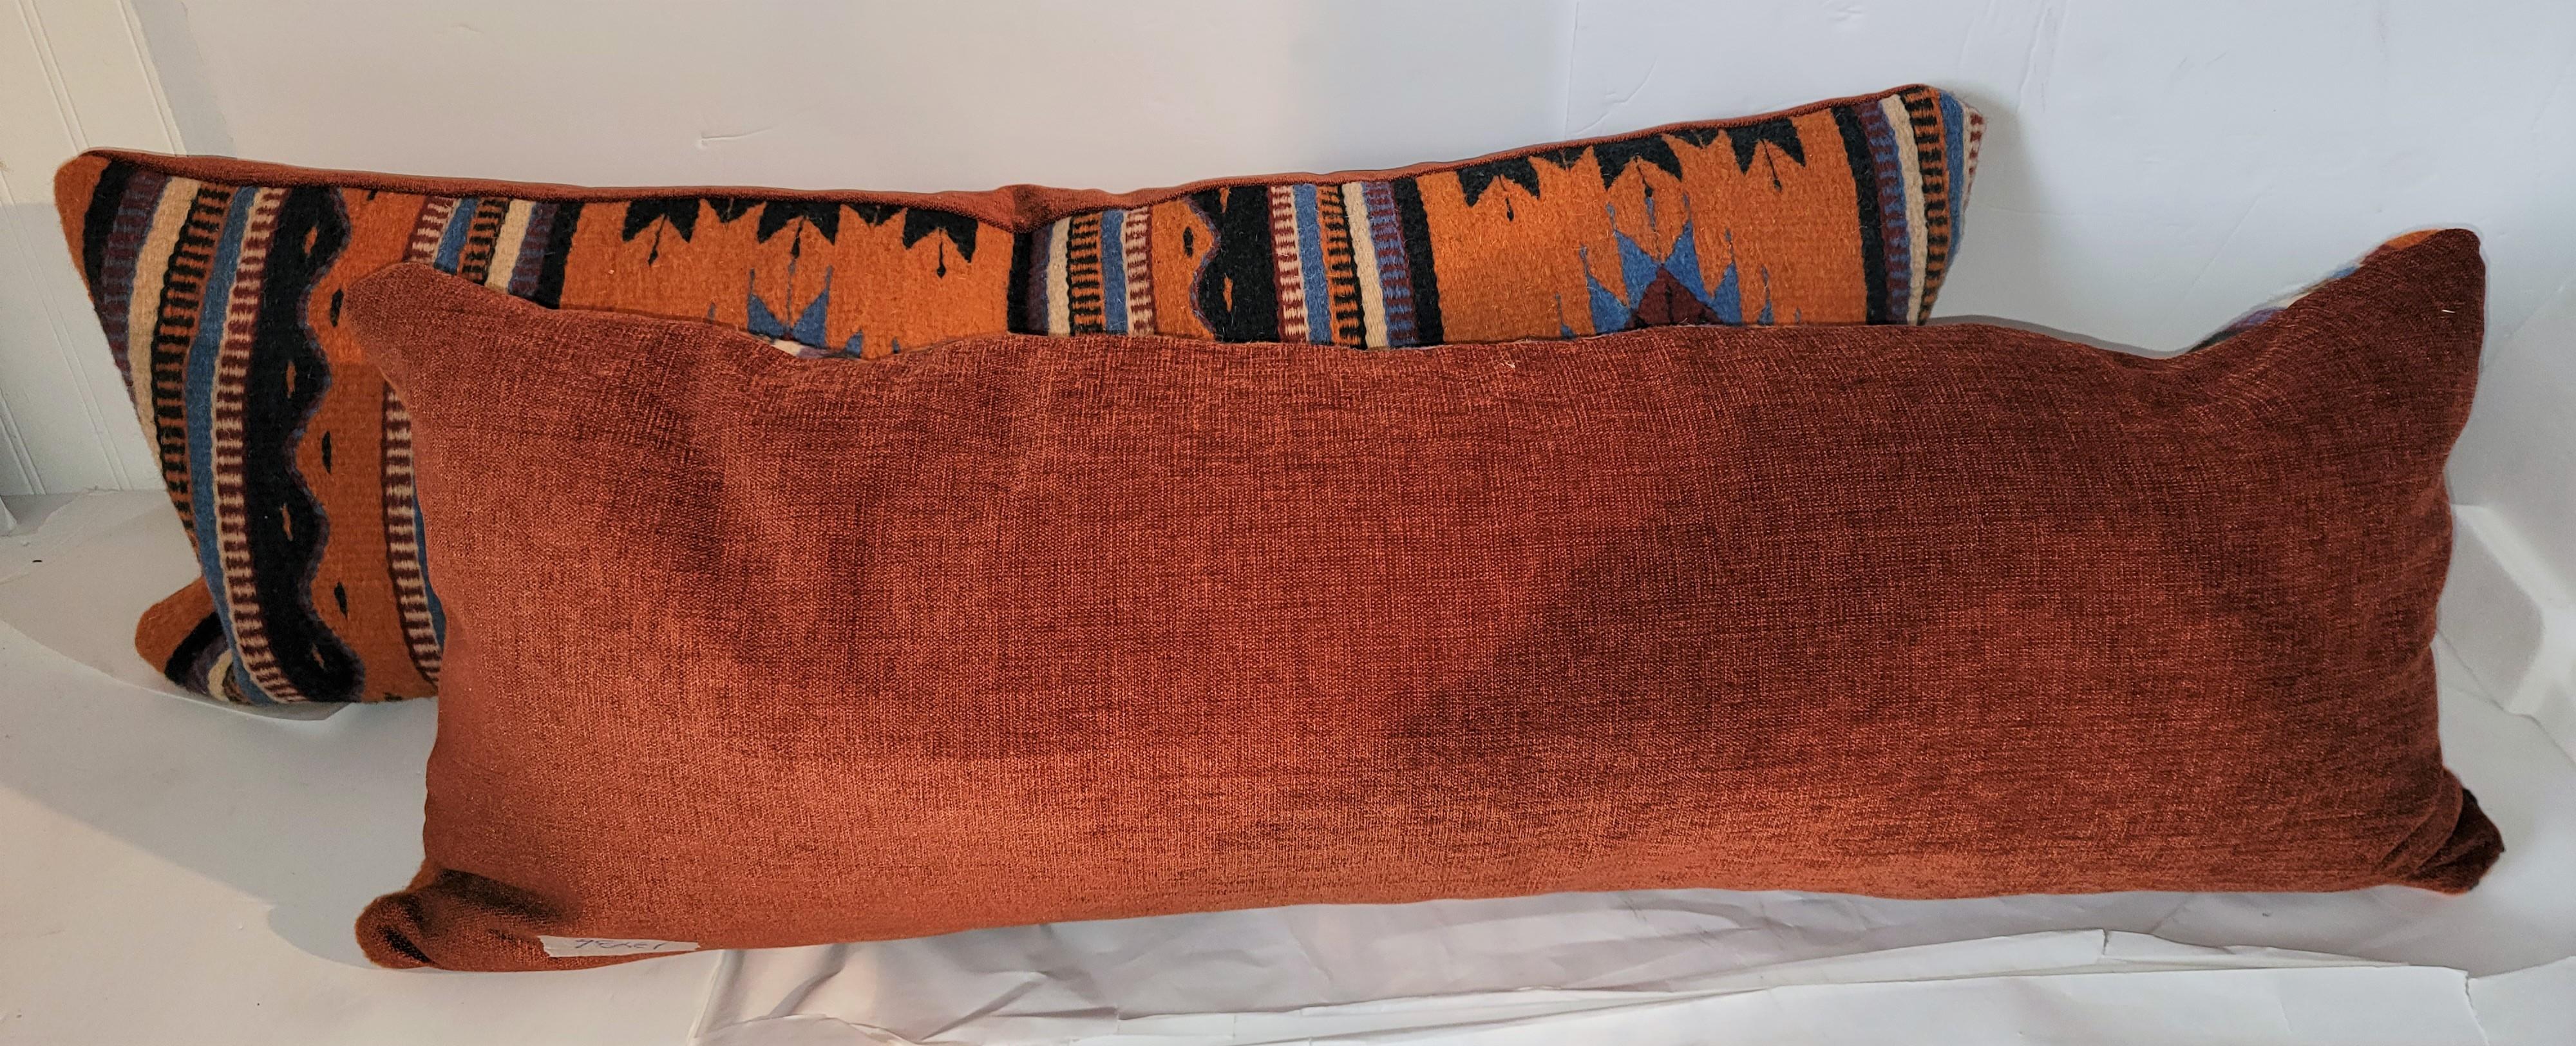 American Mexican Indian Weaving Bolster Pillows For Sale